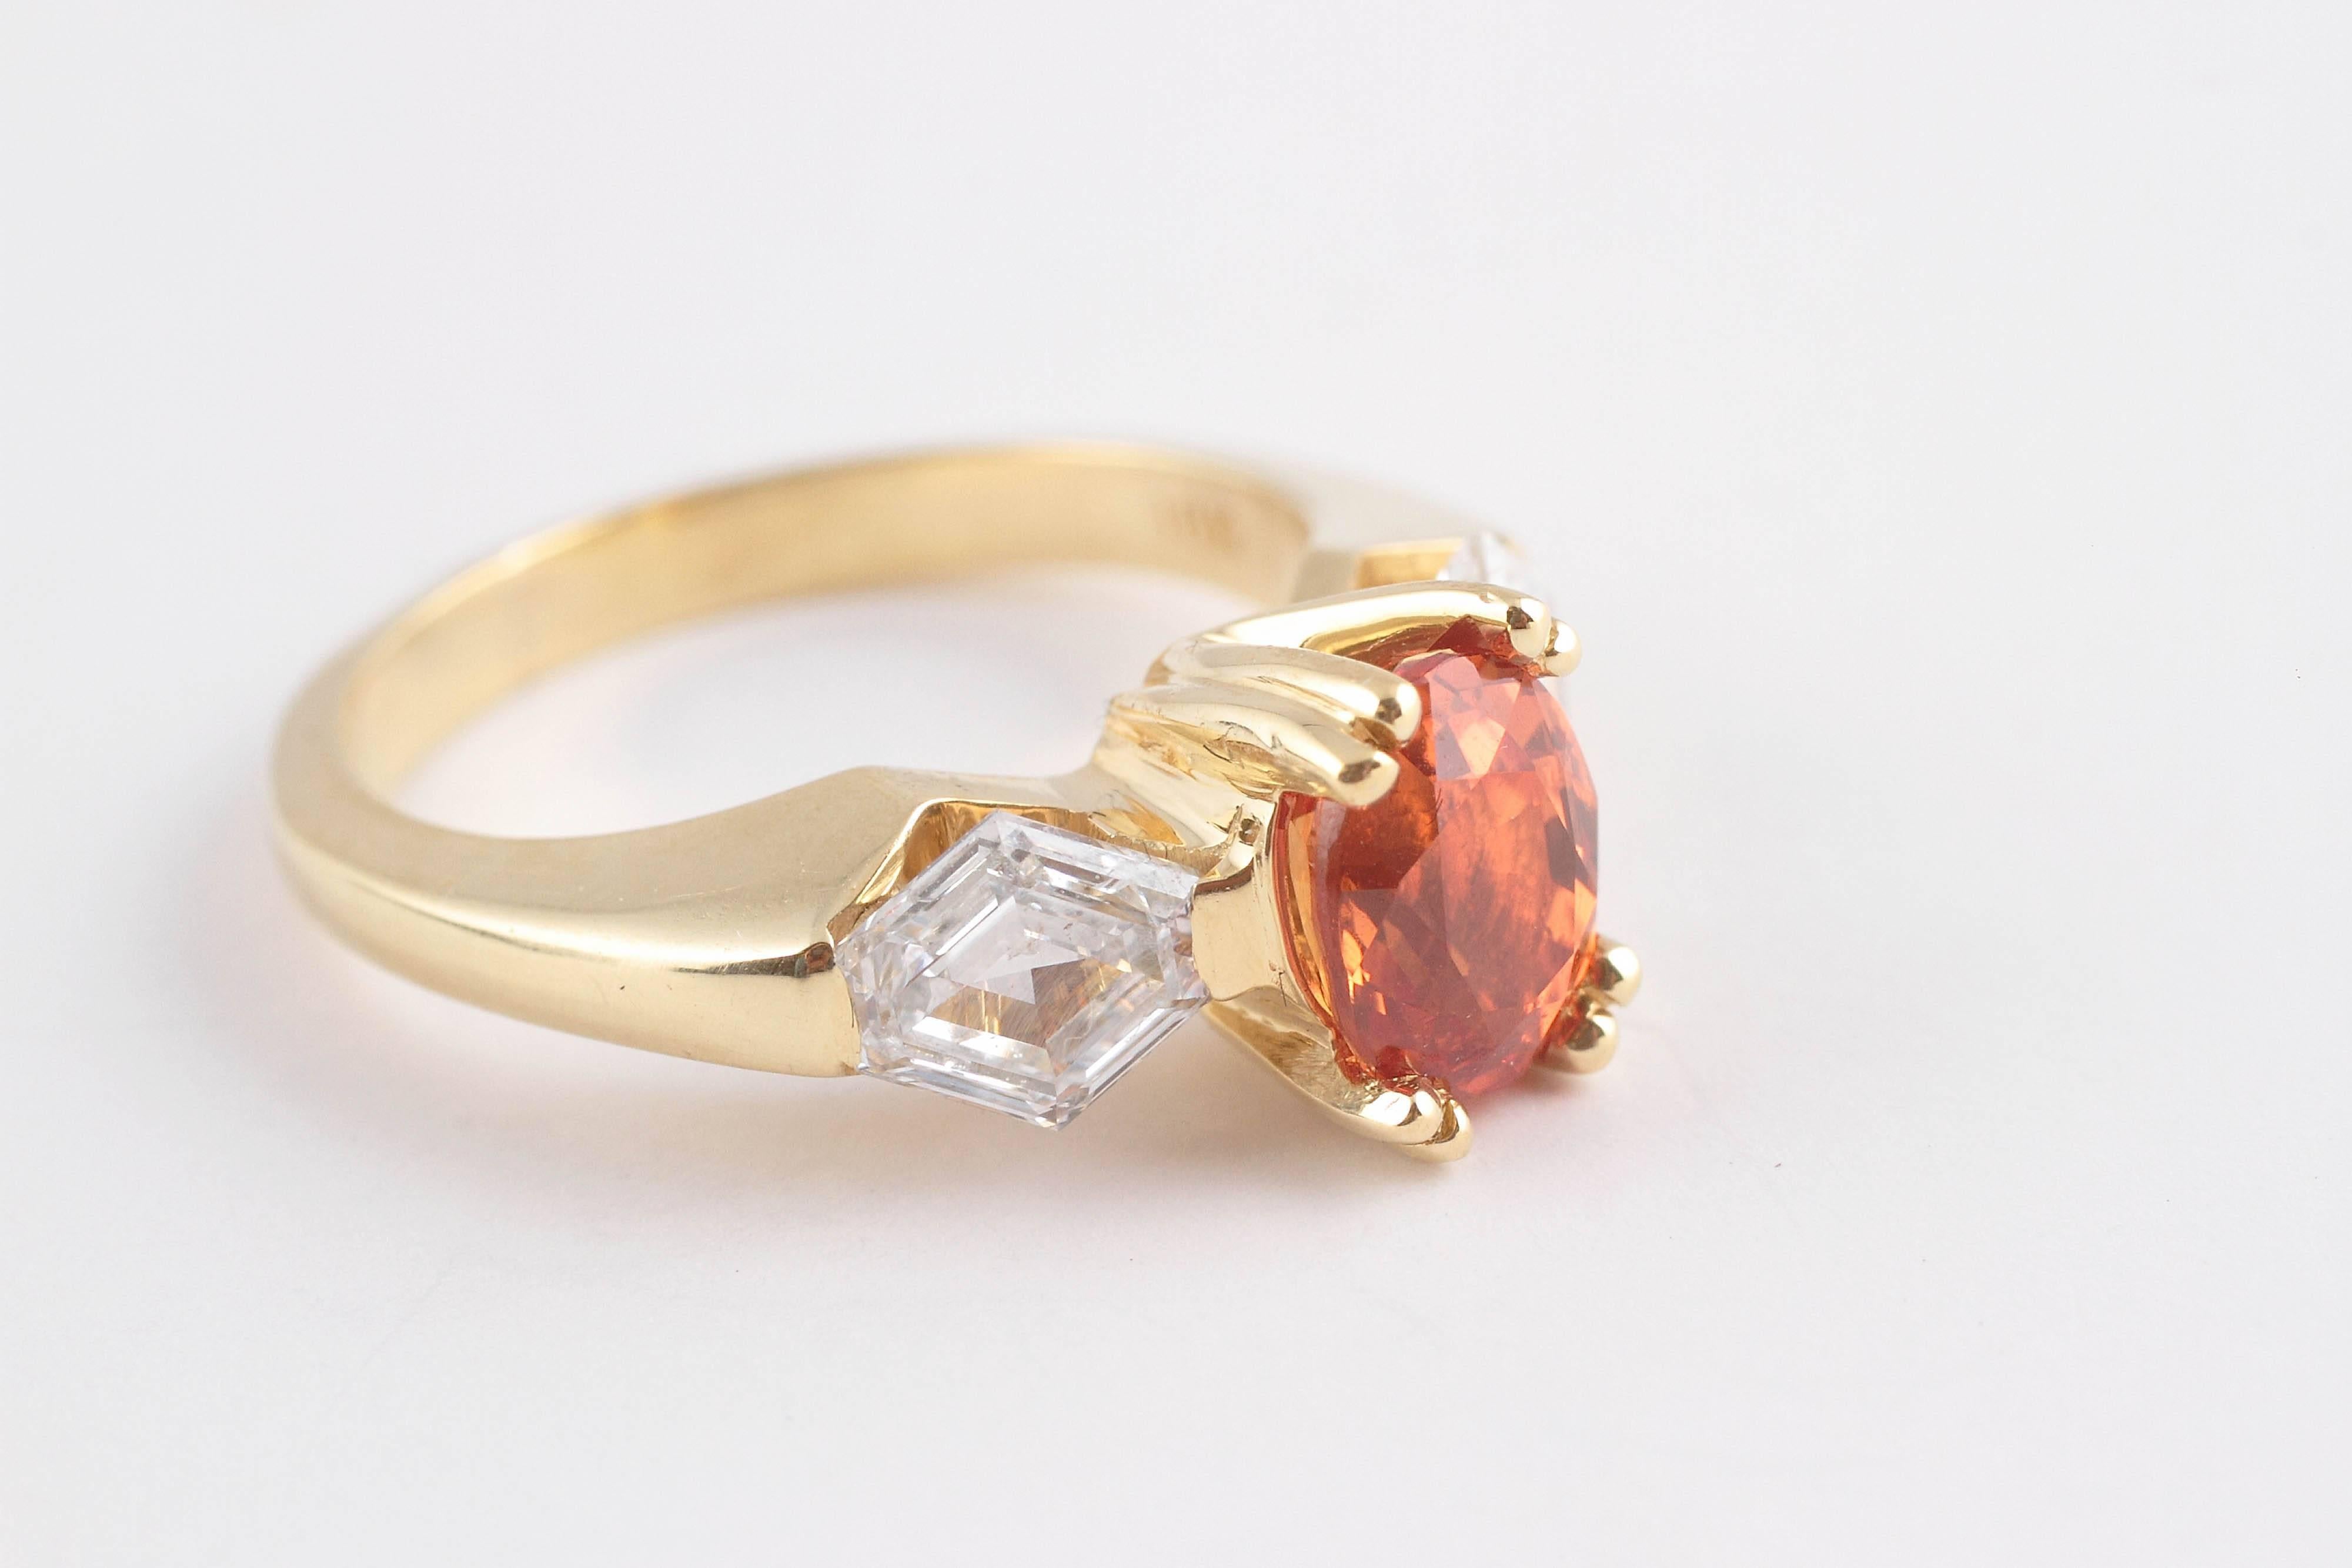 In 18 karat yellow gold, centered with an oval-shaped orange sapphire, 1.78 carats and flanked by 2 lozenge-shaped diamonds with a total weight of 1.15 carats. Size 6.